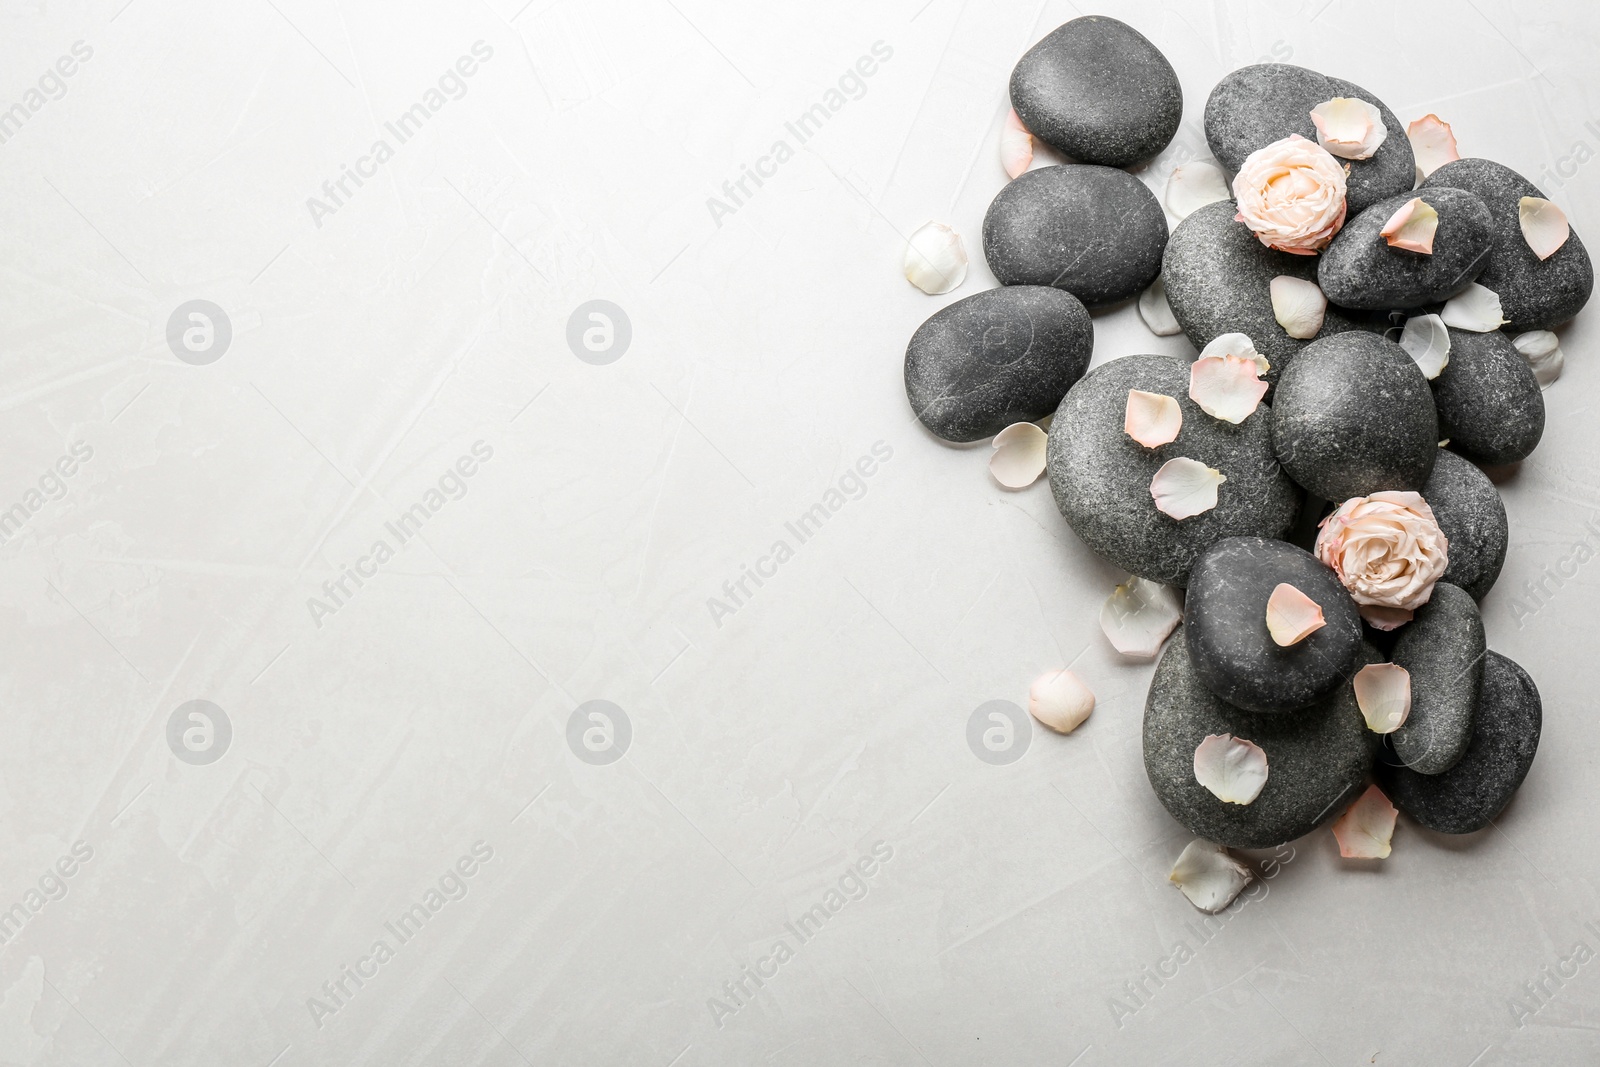 Photo of Stones and flowers on light background, top view with space for text. Zen lifestyle